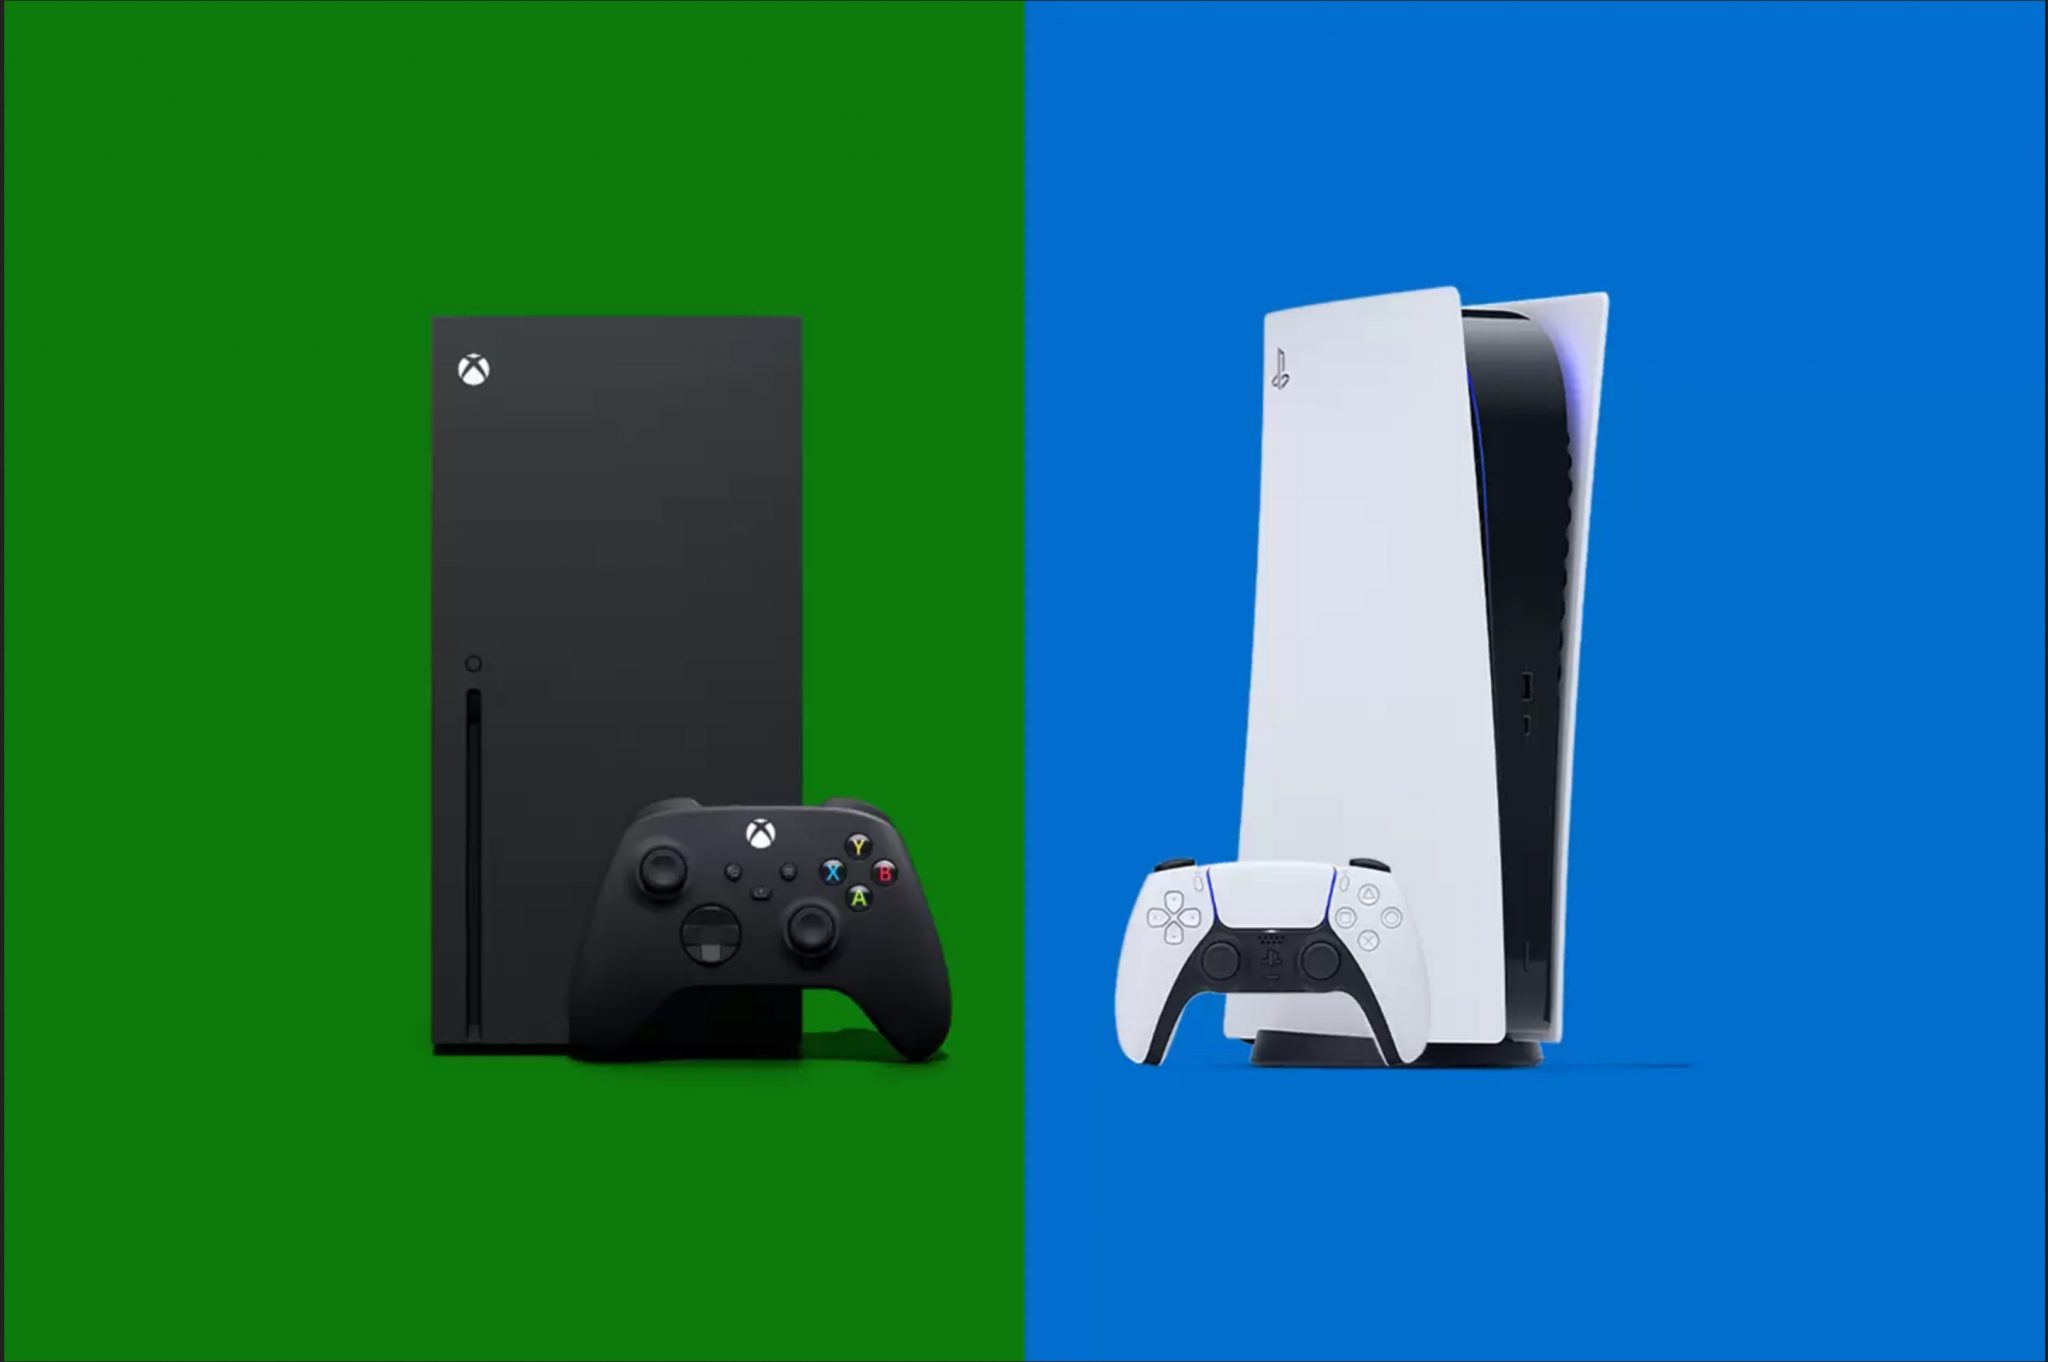 sony and microsoft new console